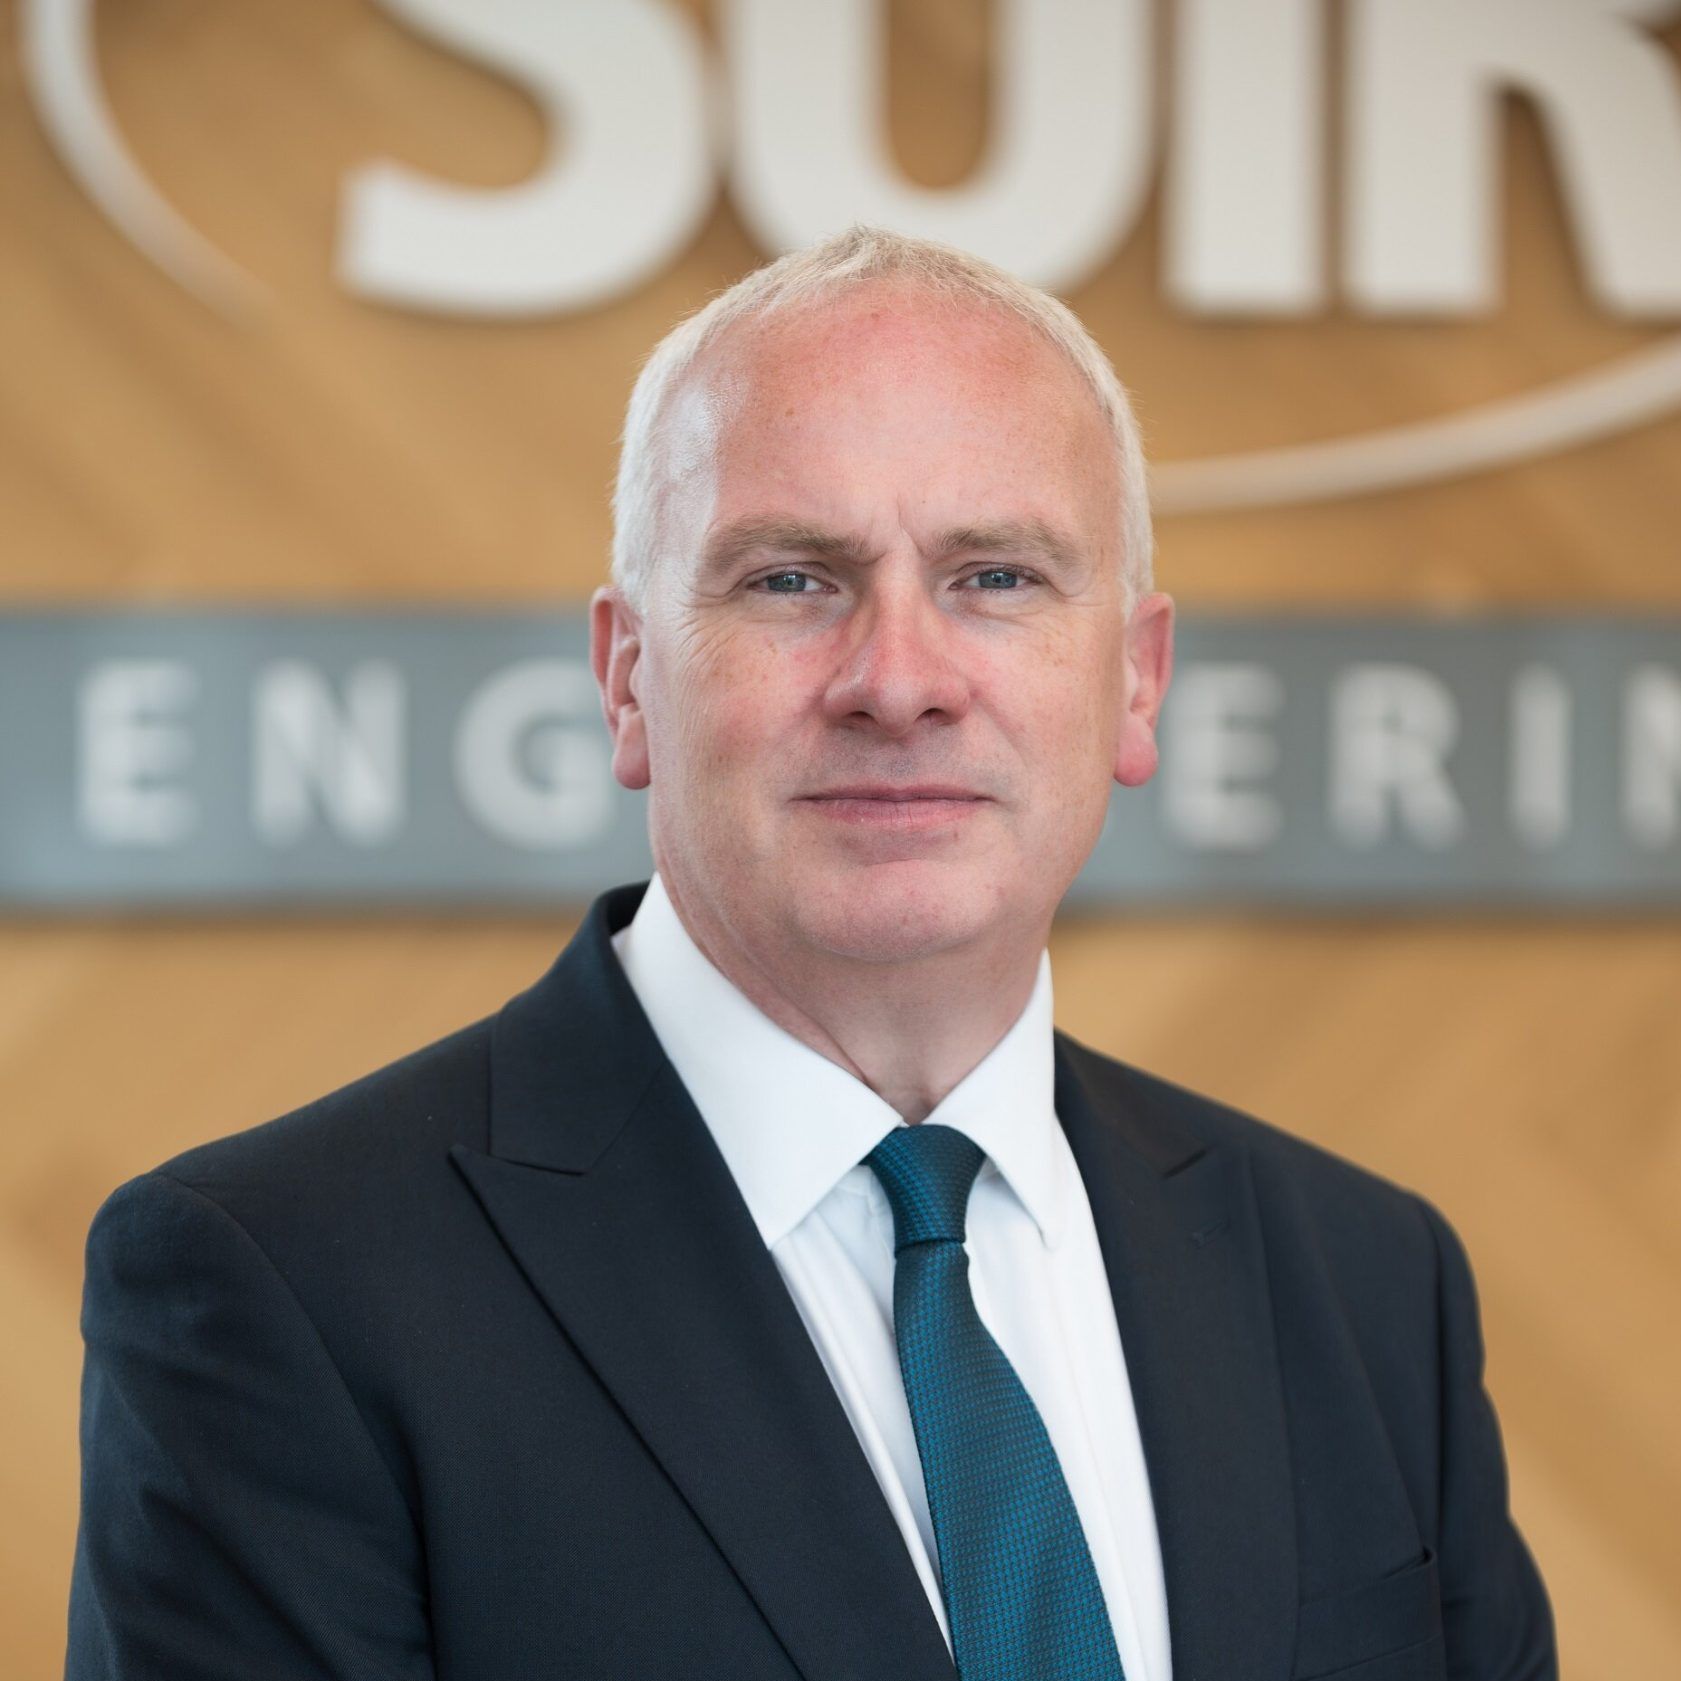 Suir Engineering reports record-breaking financial performance as it marks 40 years in business